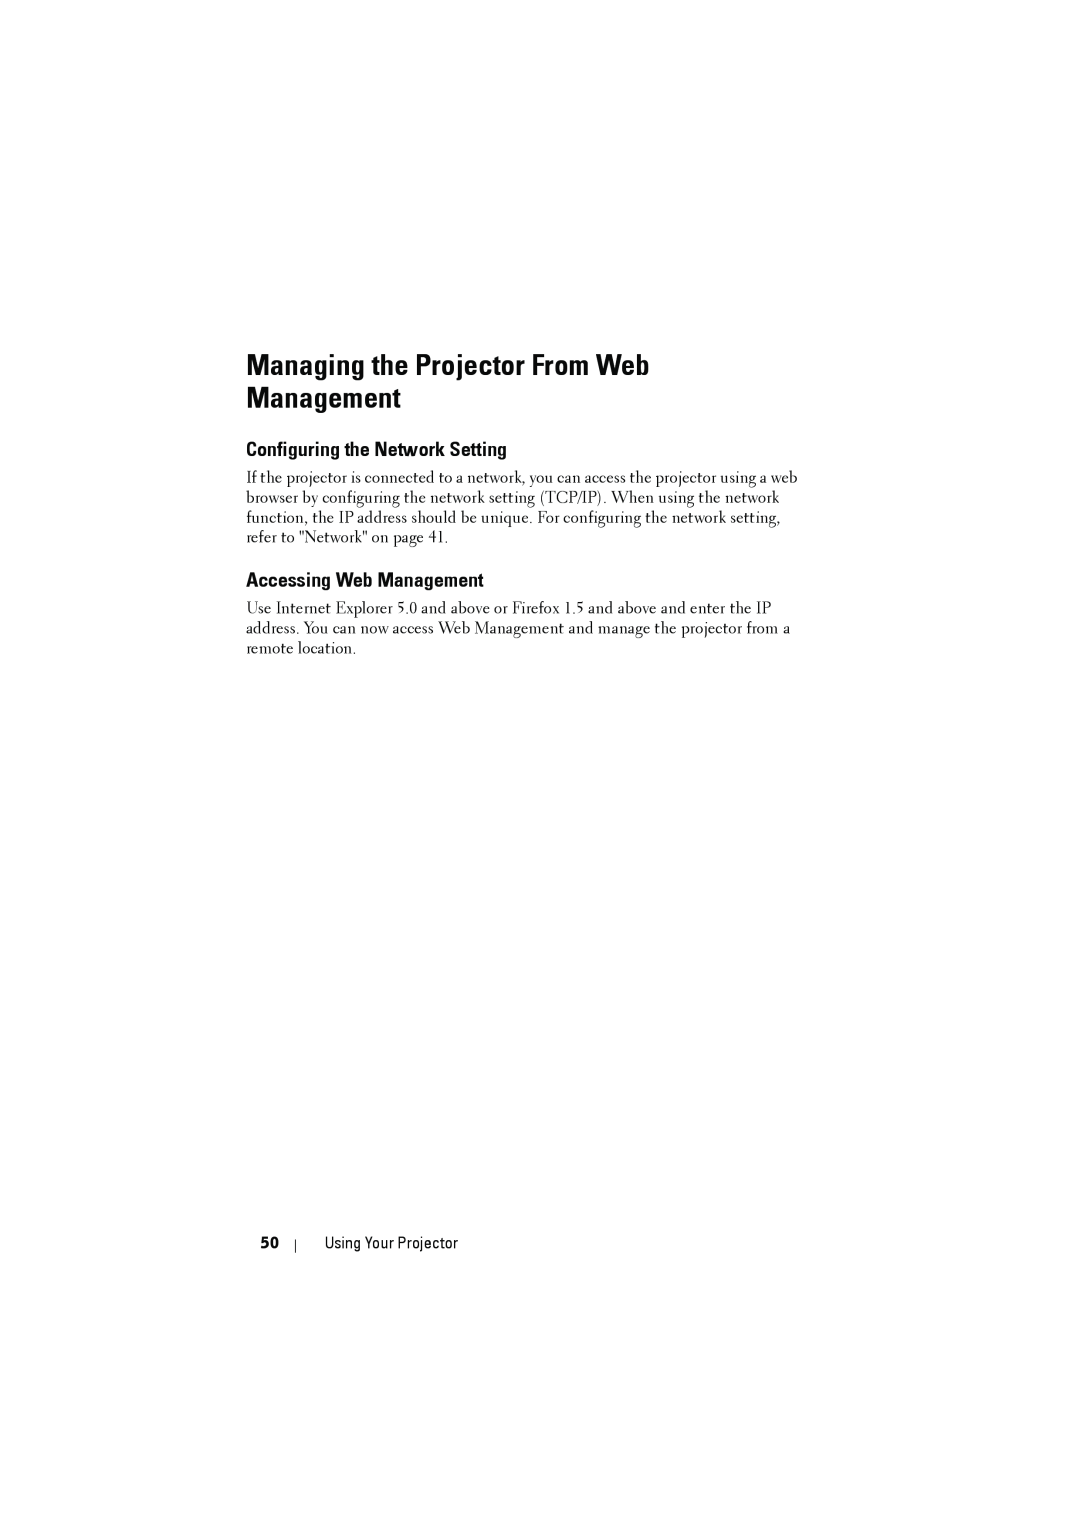 Dell S300 manual Managing the Projector From Web Management, Configuring the Network Setting, Accessing Web Management 